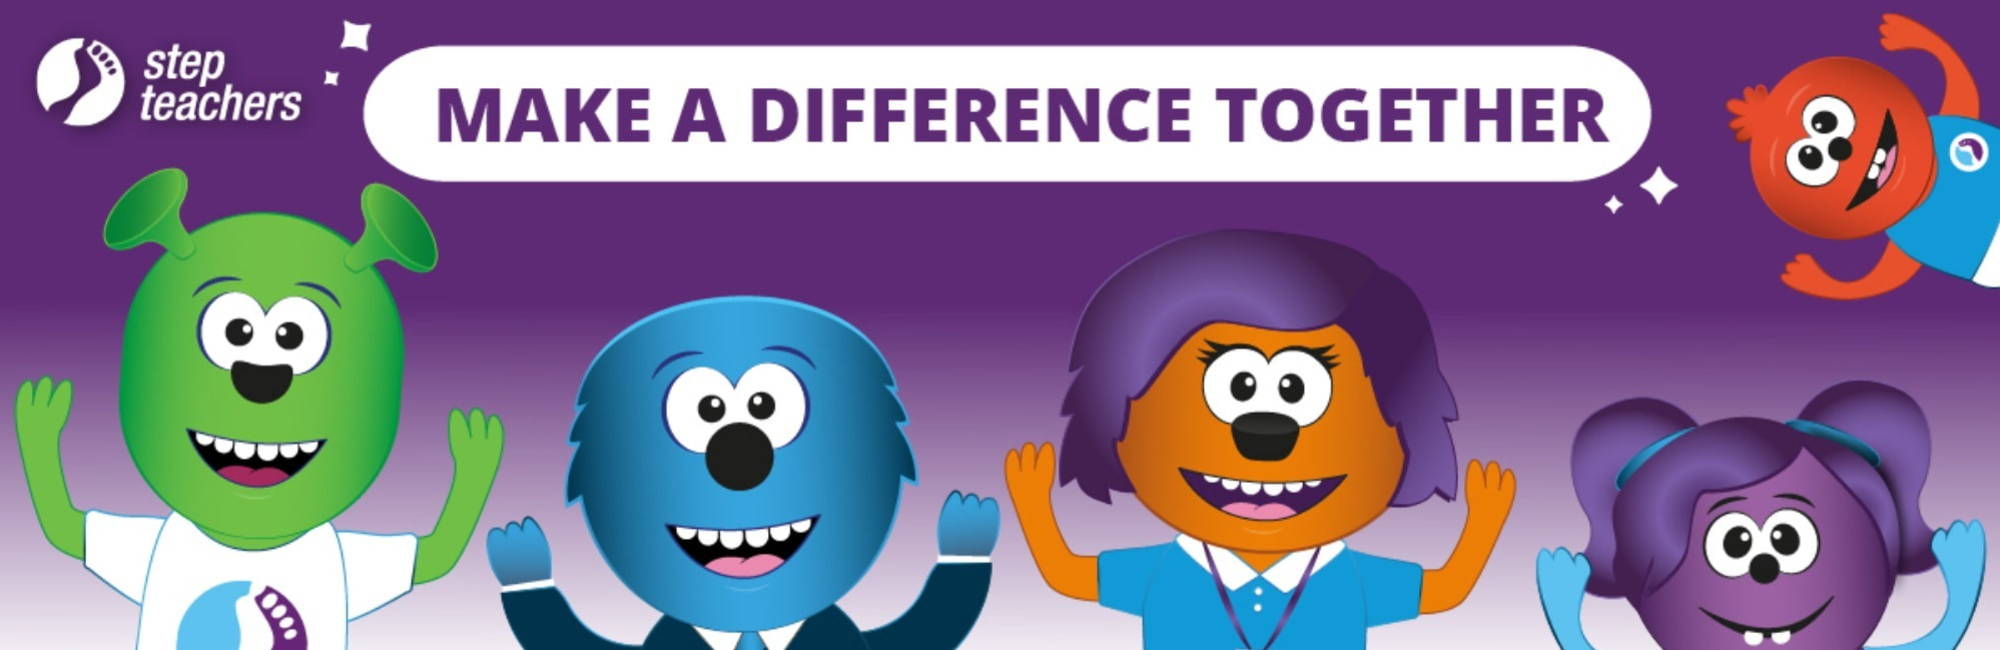 Make a difference banner